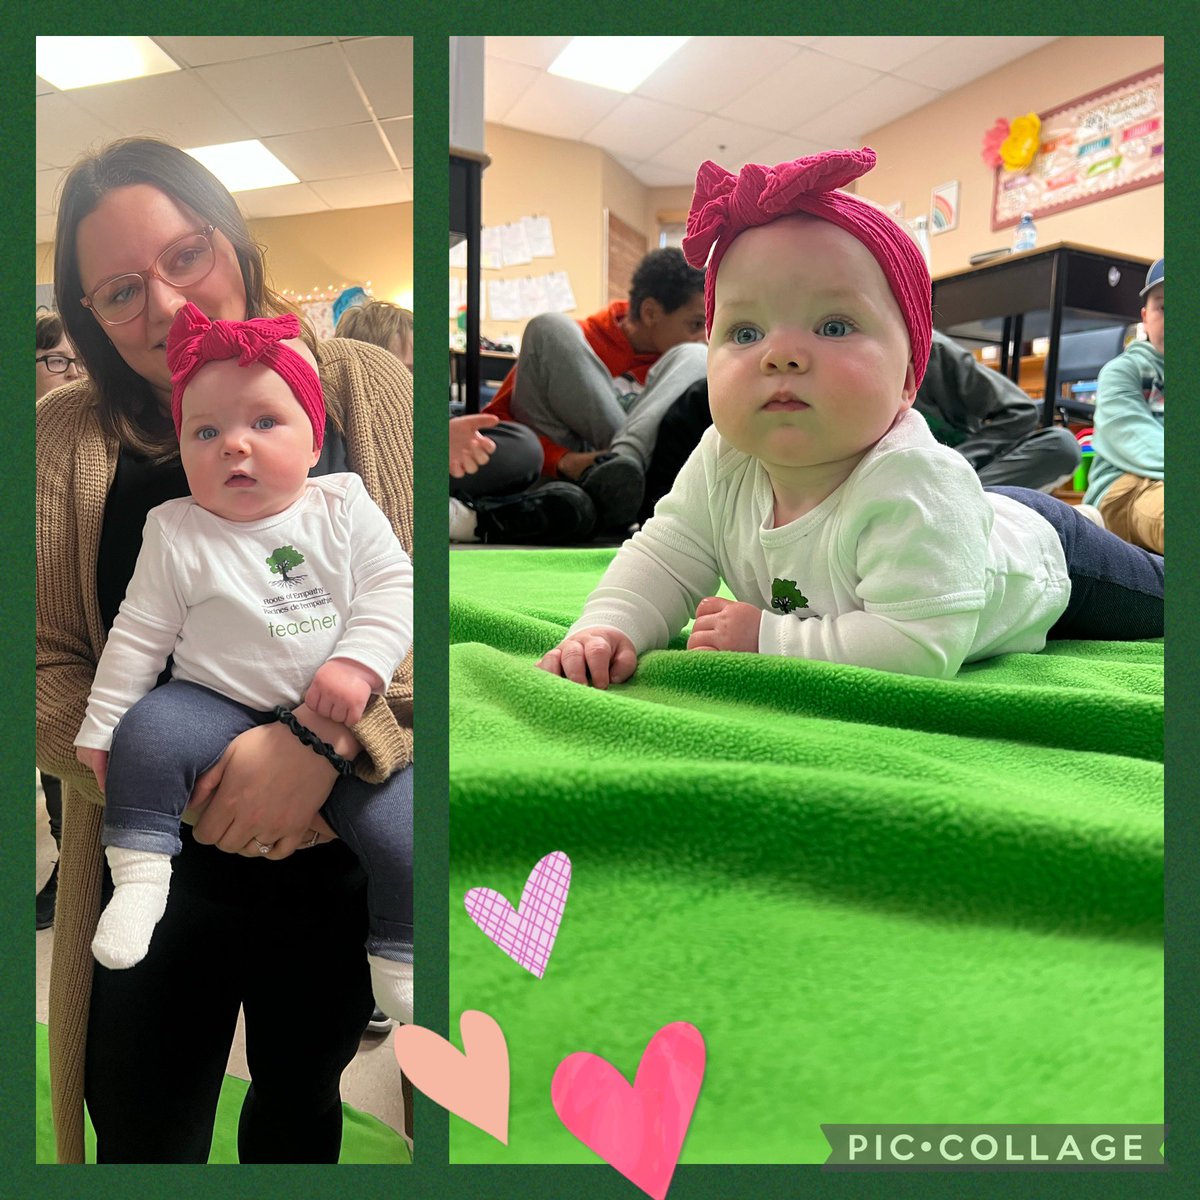 Our tiny teacher, Baby Kate is filling us with curiosity and joy during each visit 💕@RootsofEmpathy @VillanovaSchool